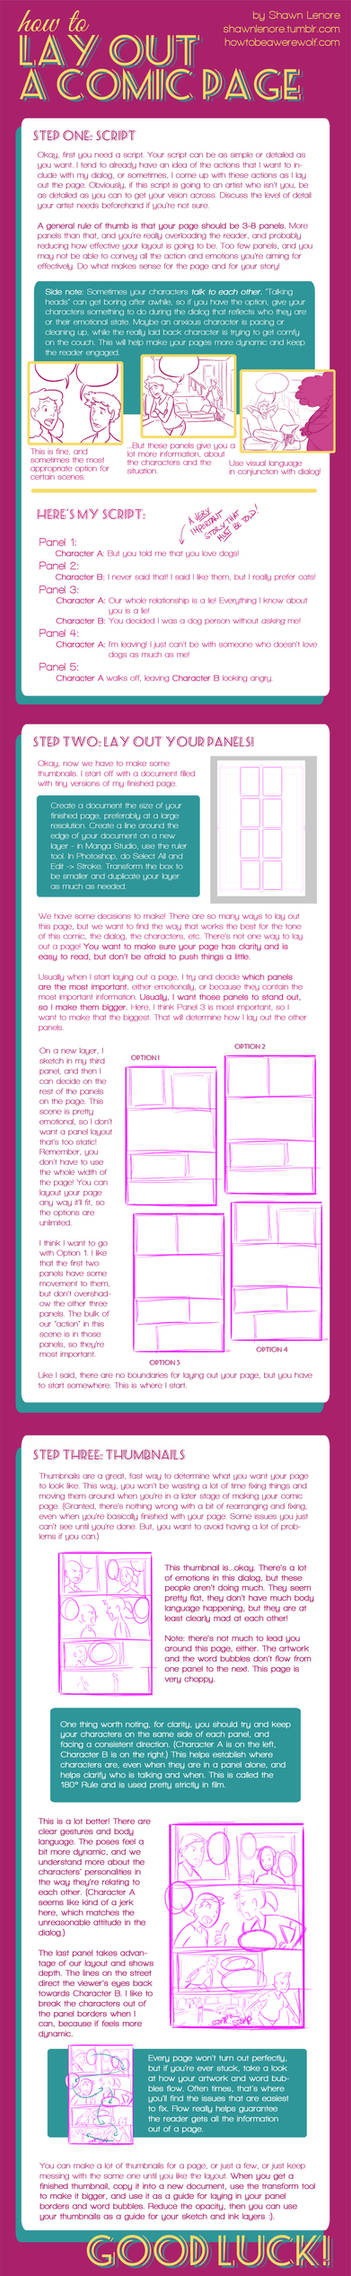 How to Lay Out a Comic Page